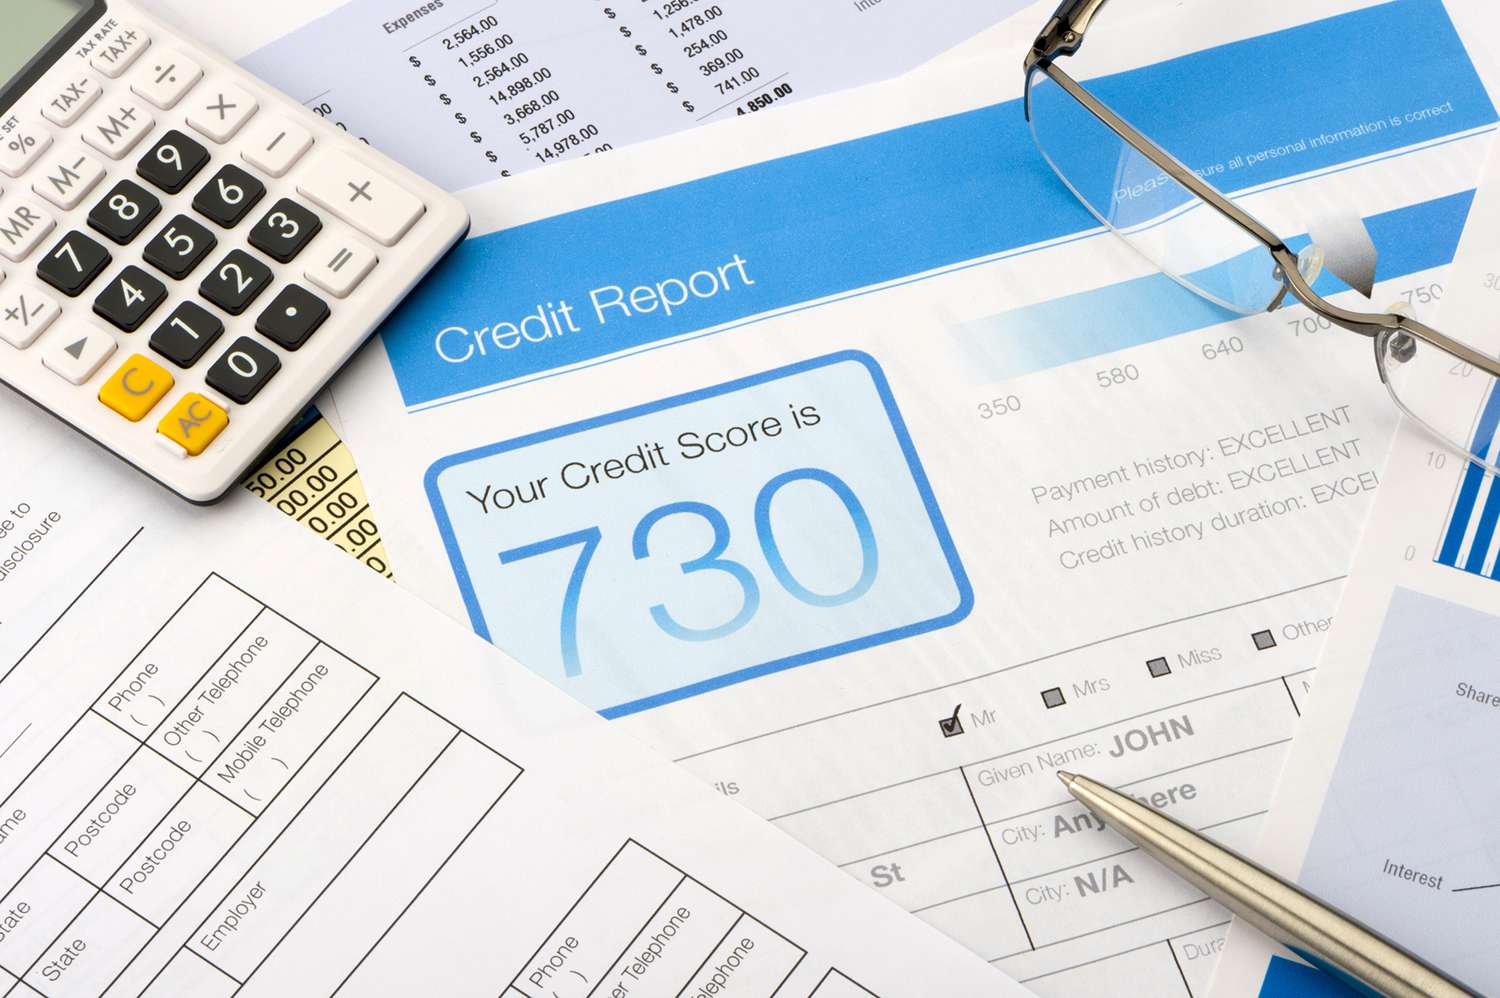 What’s The Catch With Many Services Promoting A “Free Credit Score?